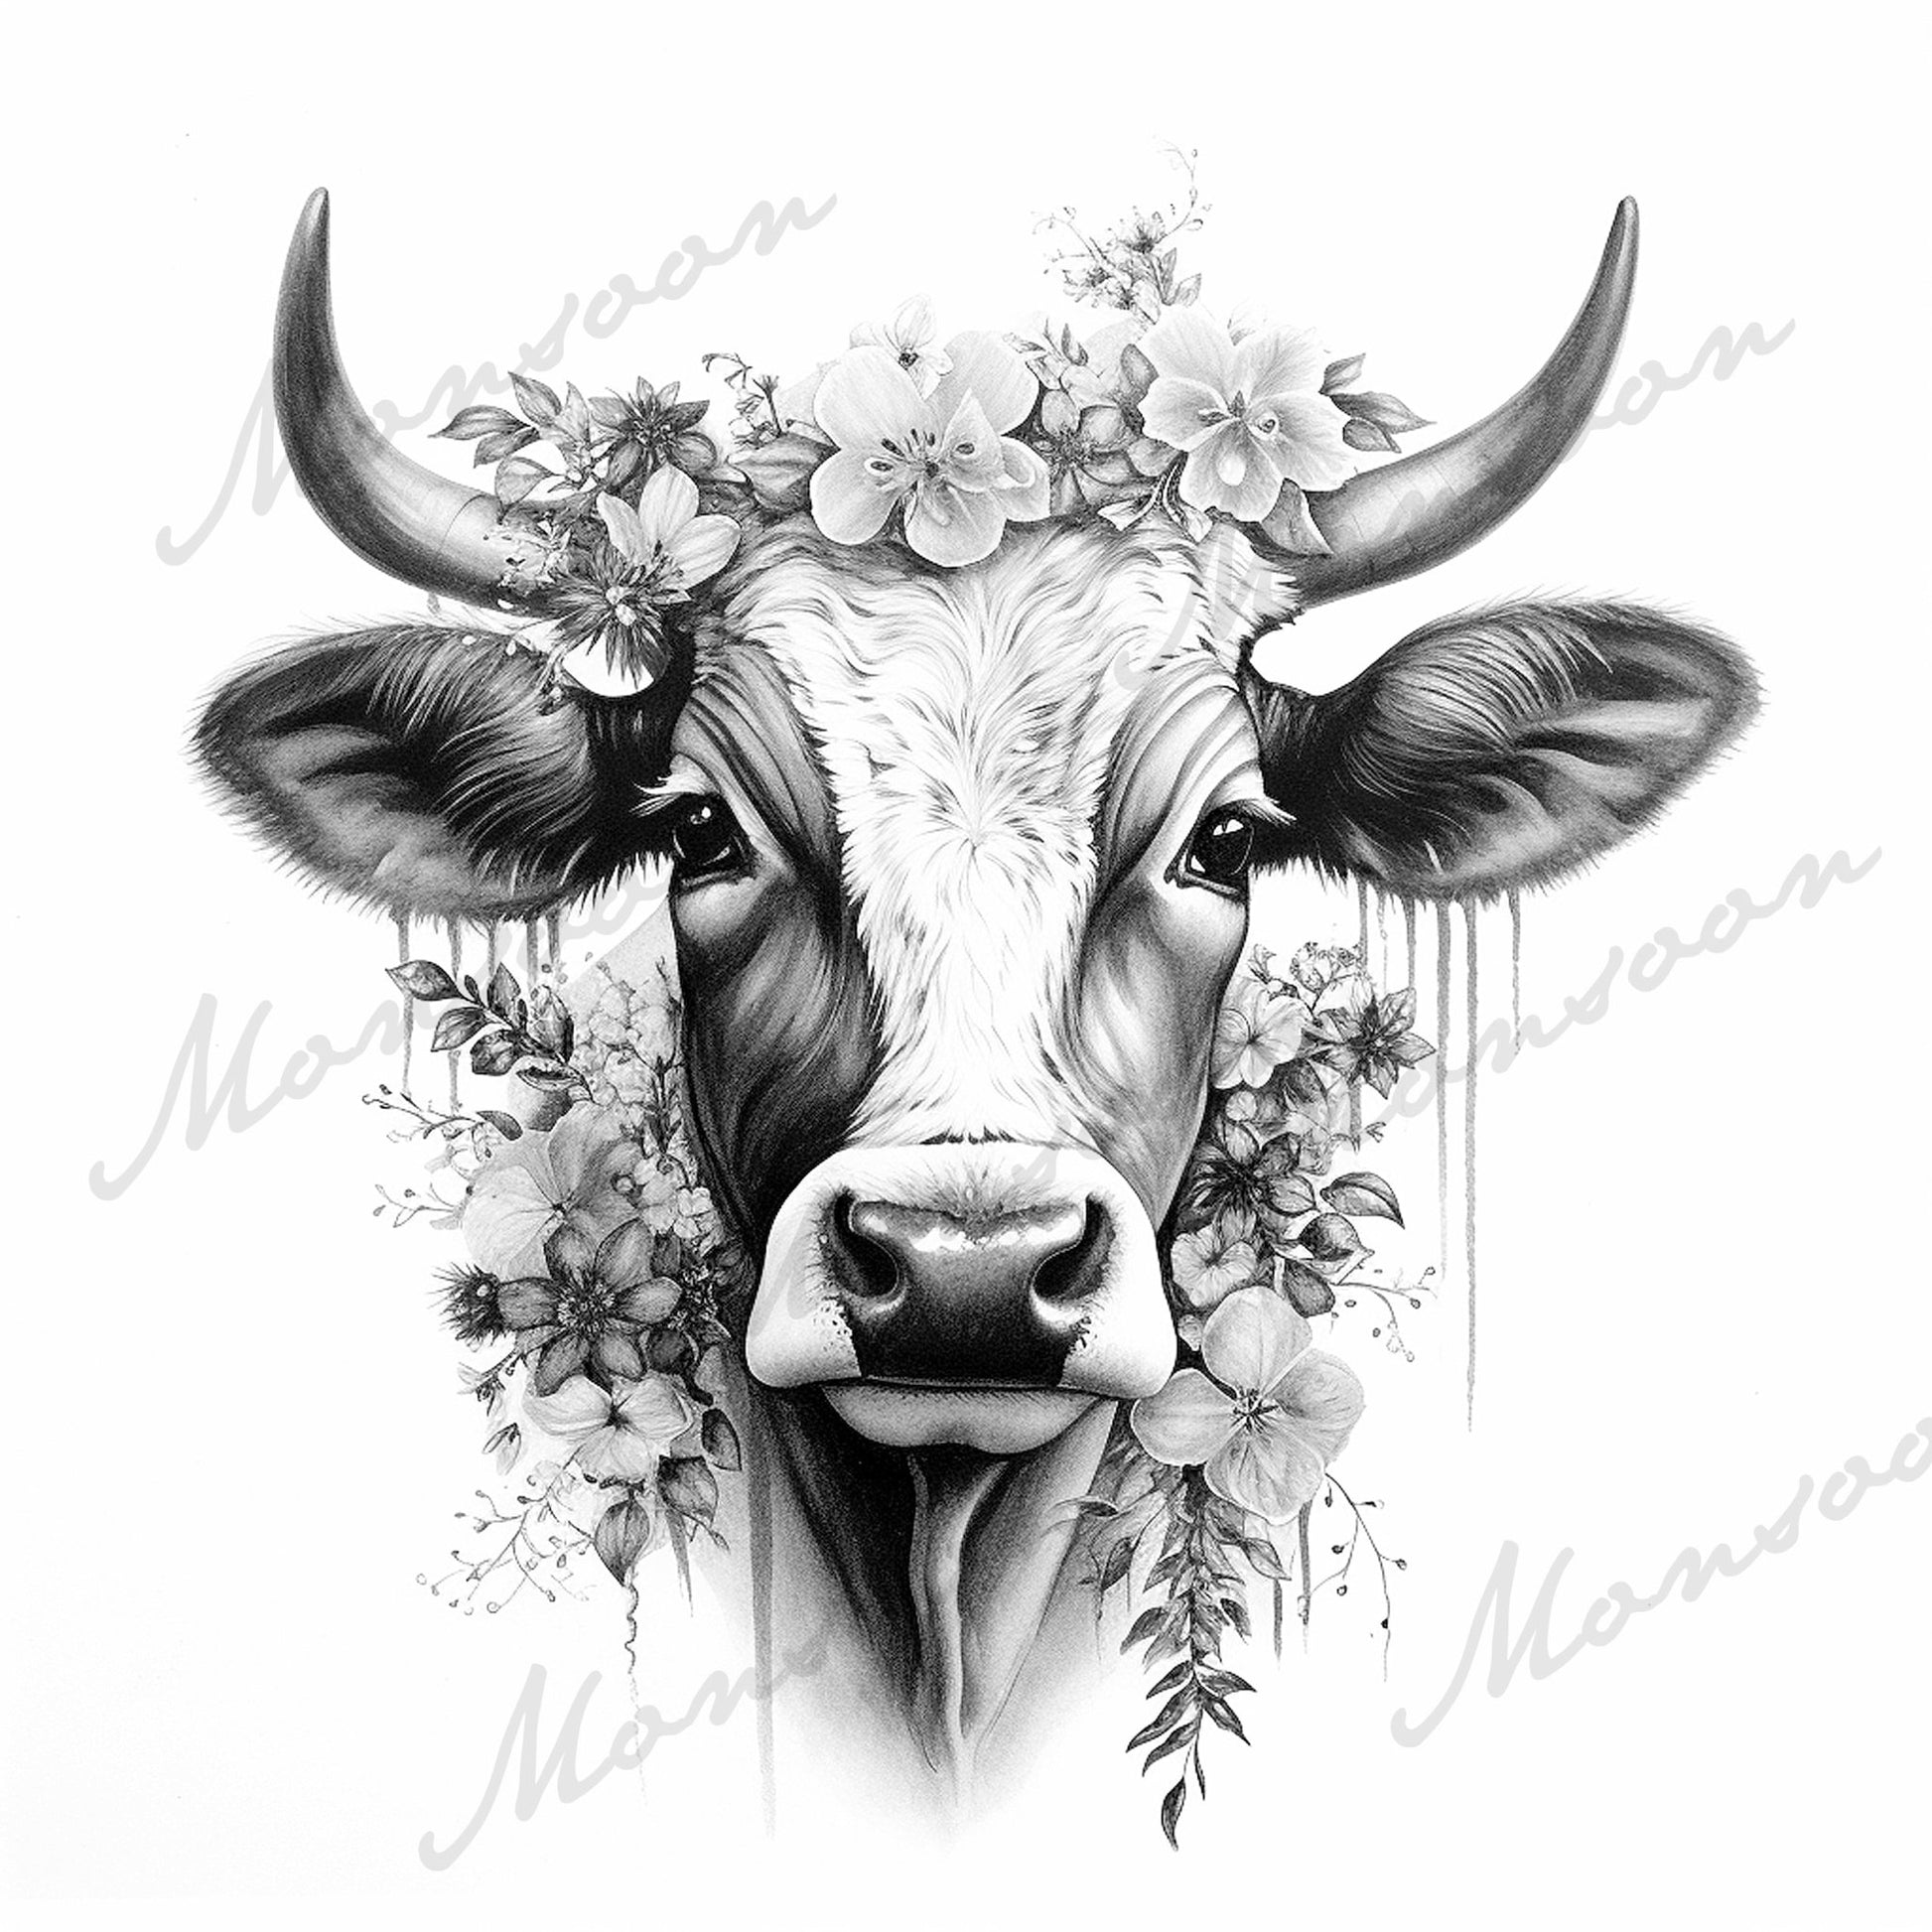 Cows Coloring Book Grayscale (Printbook) - Monsoon Publishing USA